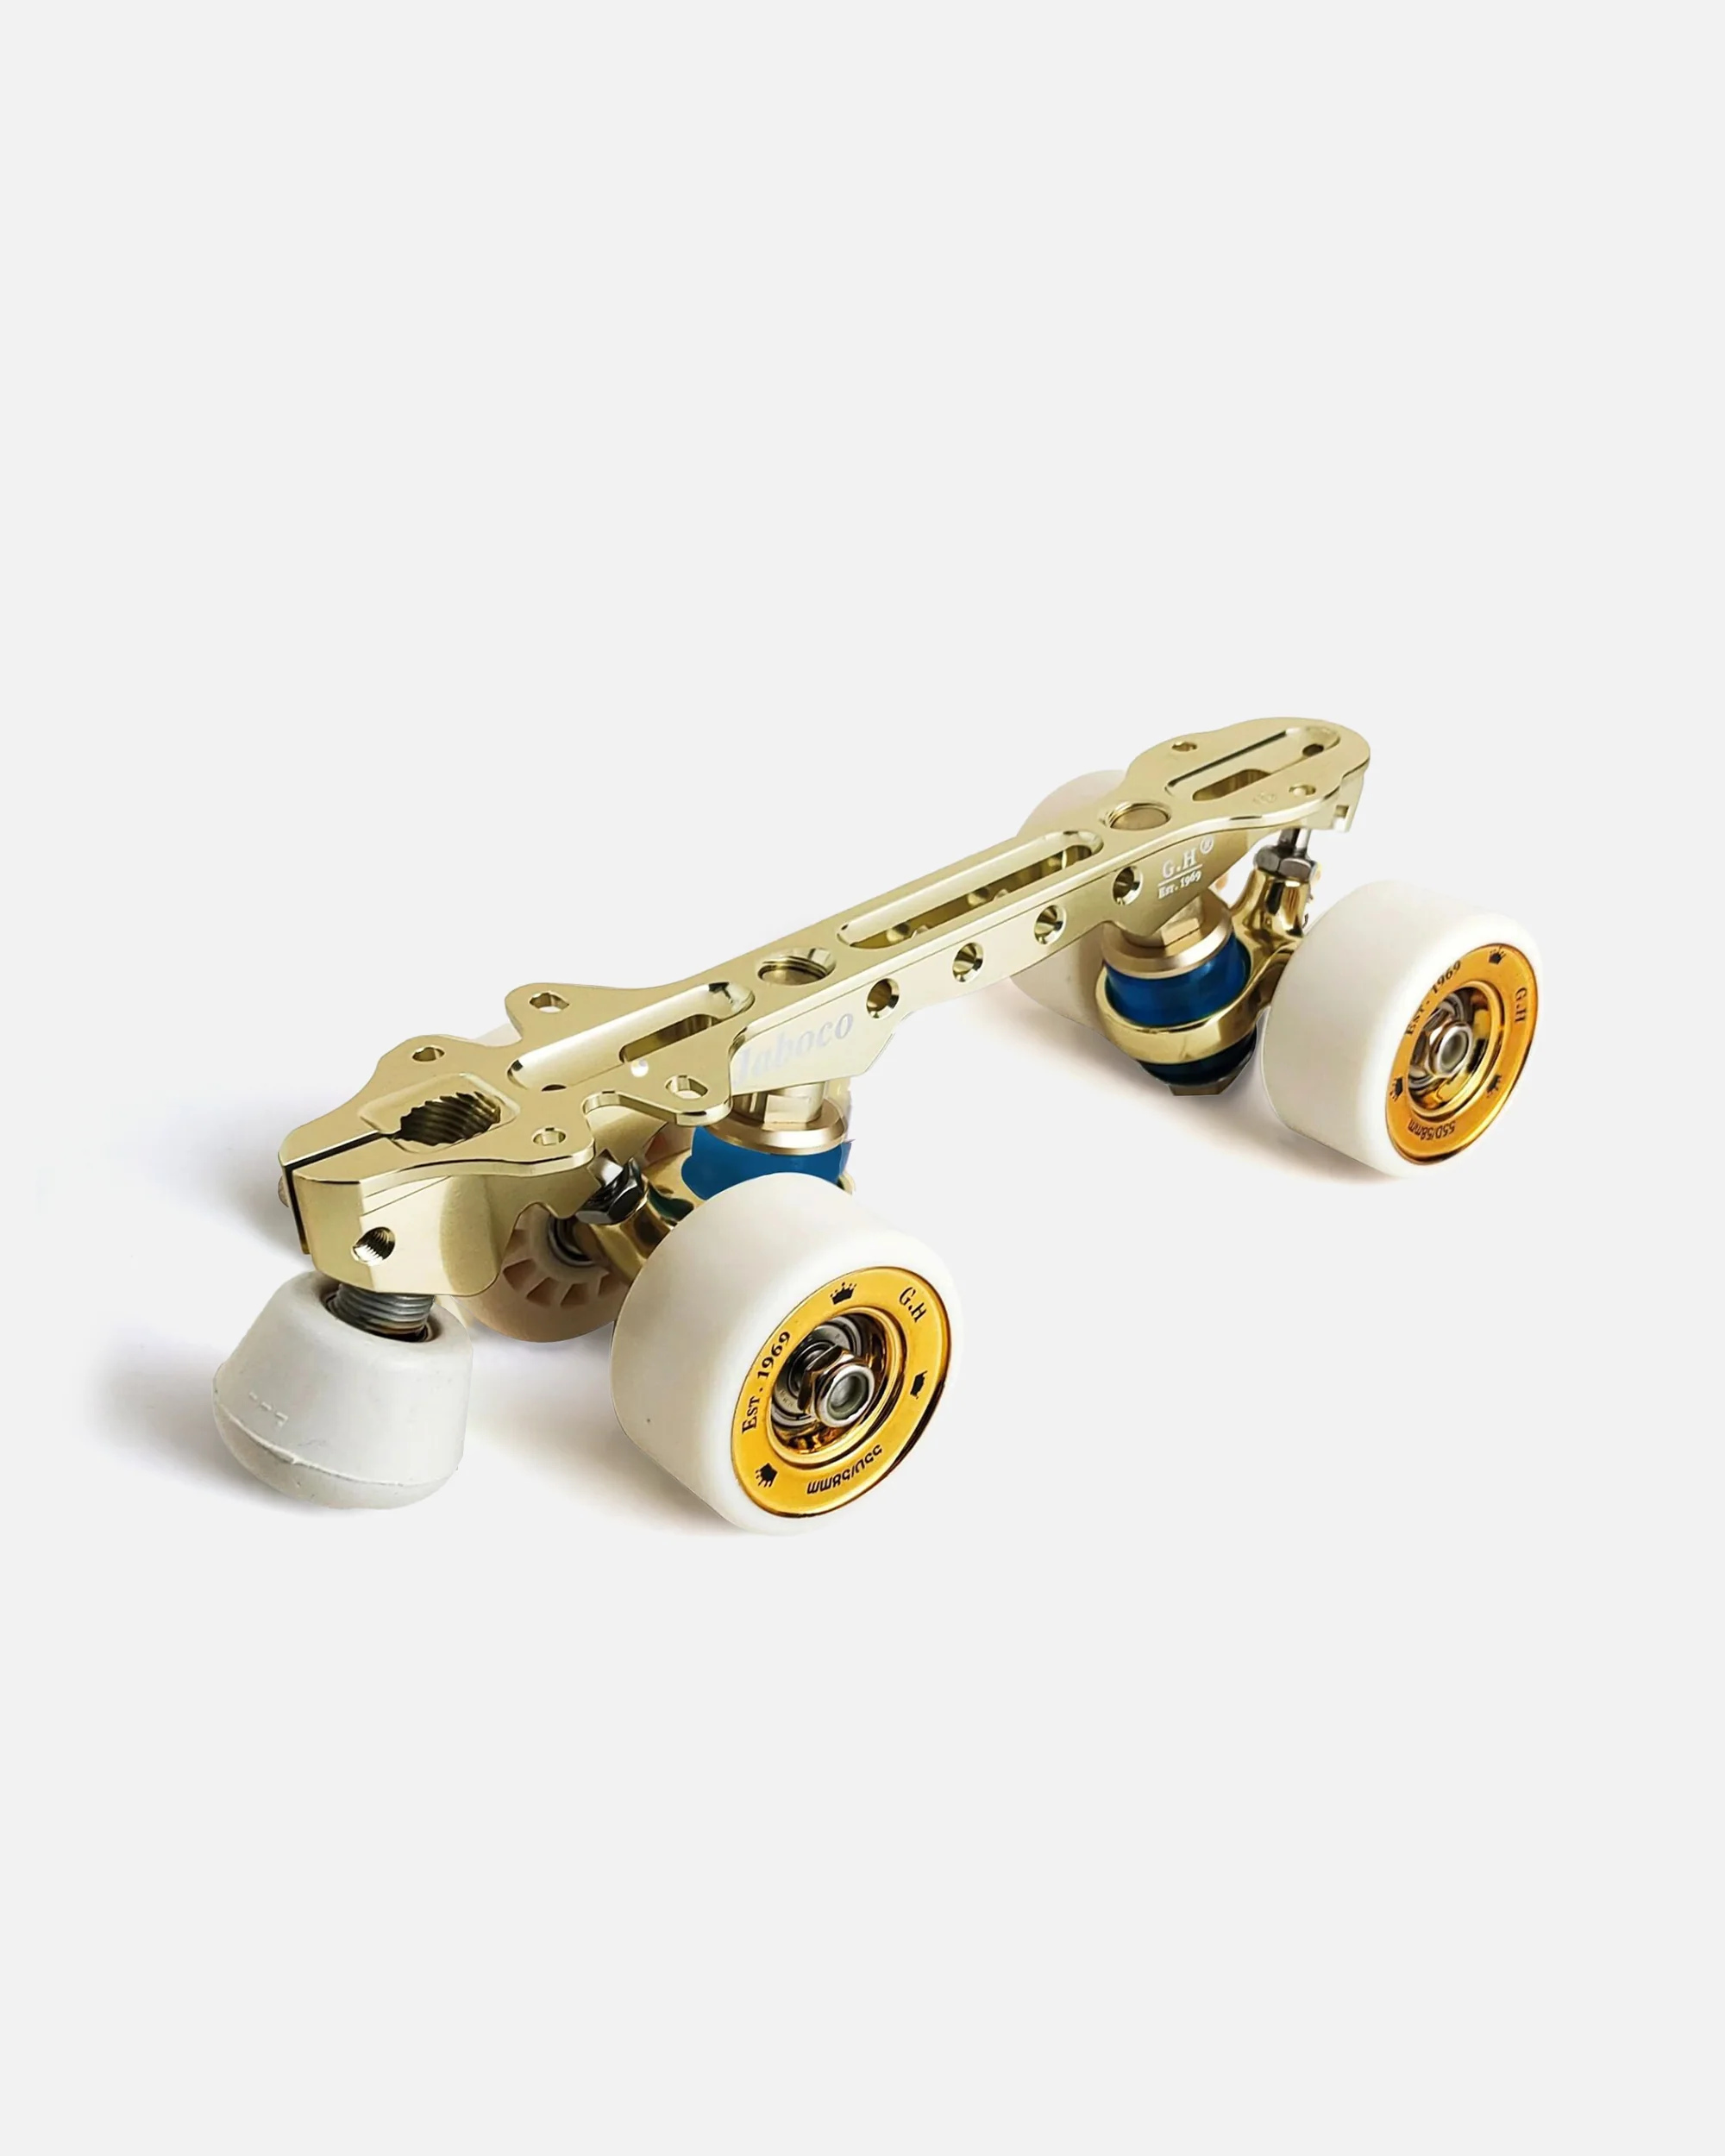 Jaboco super light quad frames— with bearings and wheels